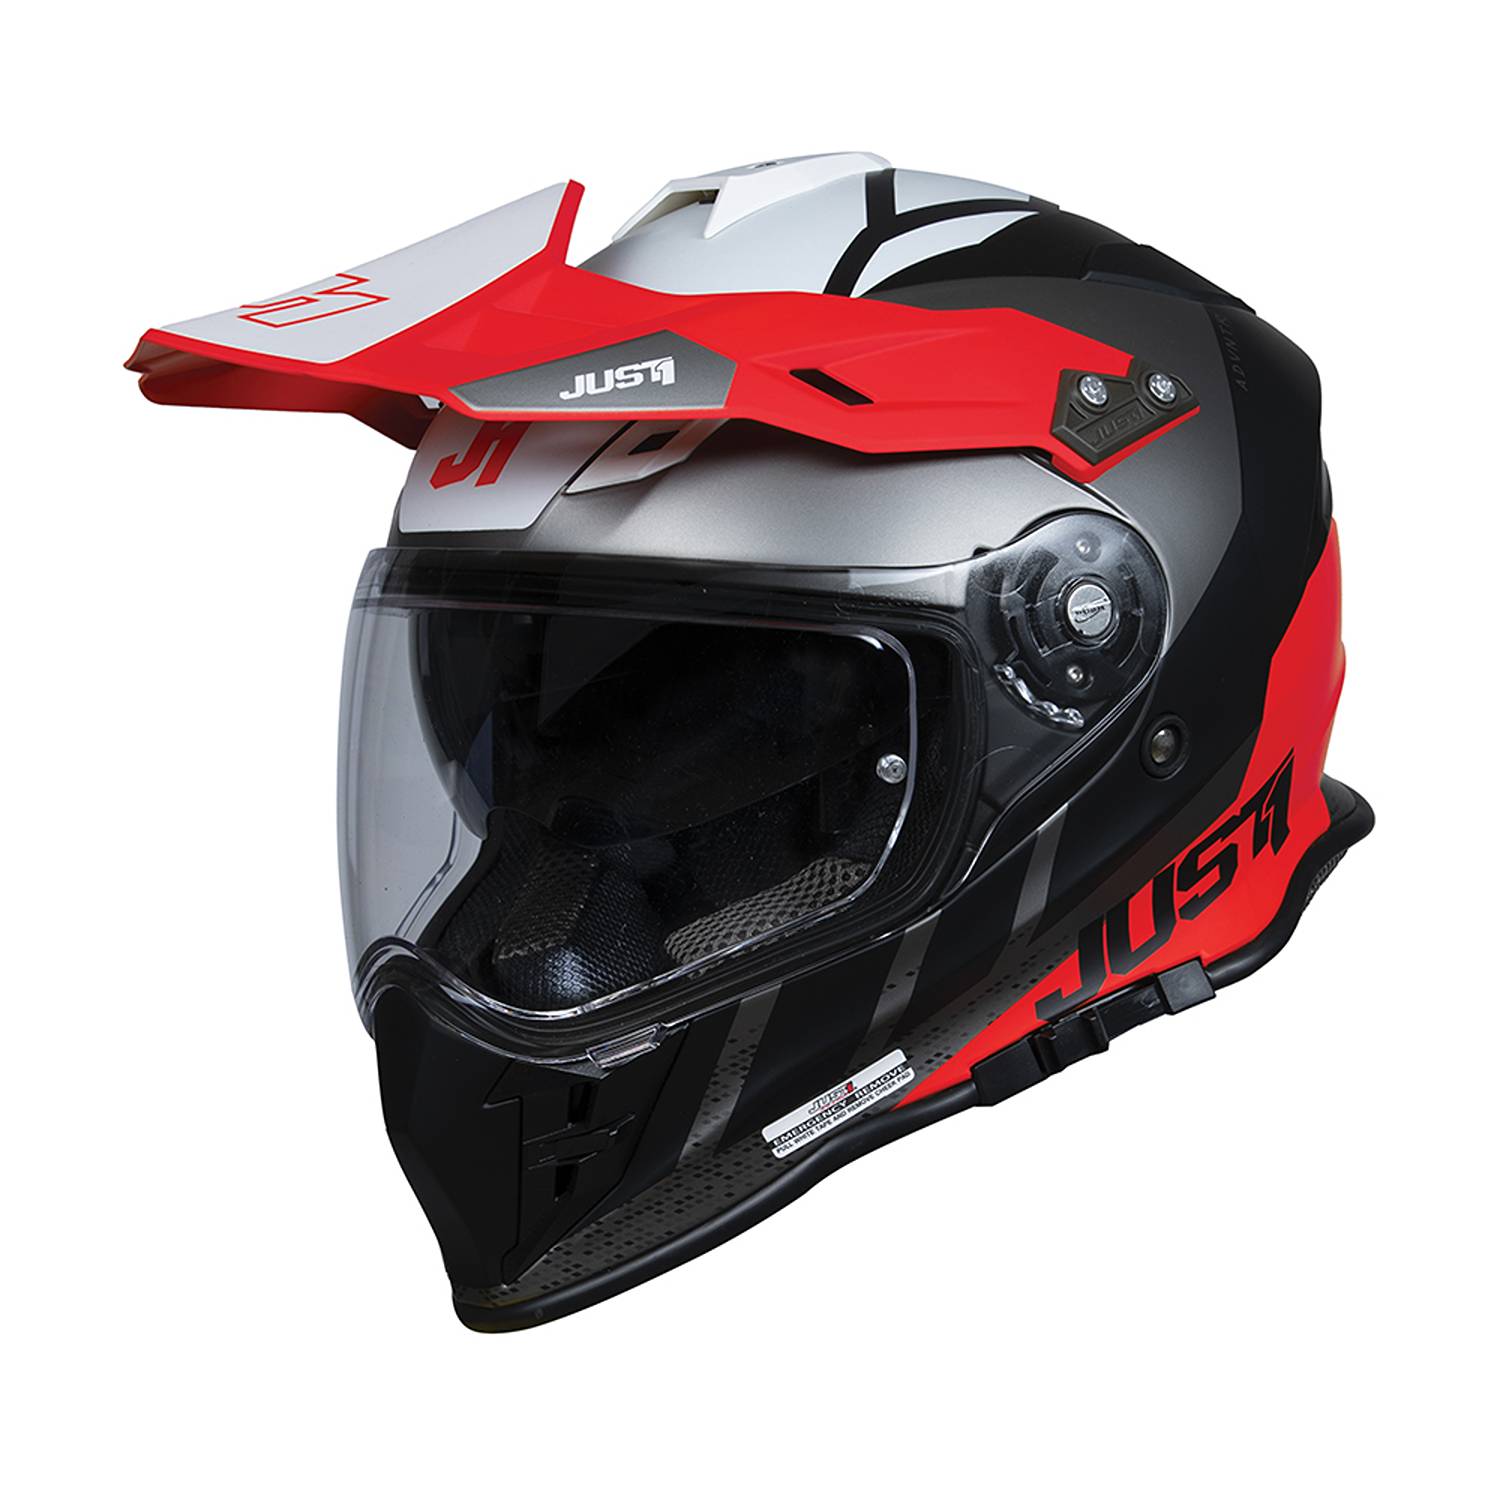 Image of Just1 J34 Pro Outerspace Black Red White Adventure Helmet Size M ID 8055774028004